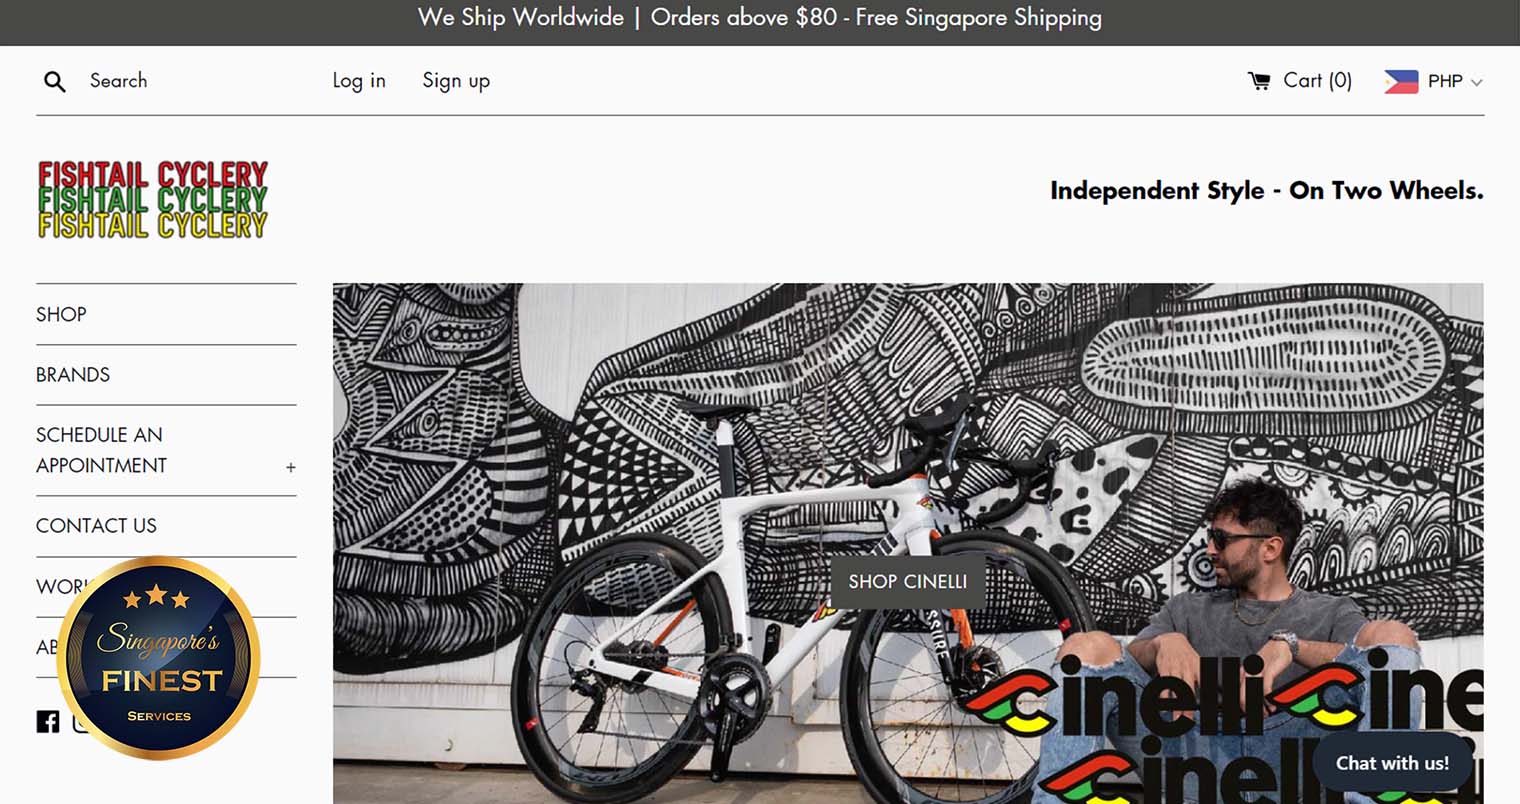 Fishtail Cyclery - Bicycle Shop Singapore